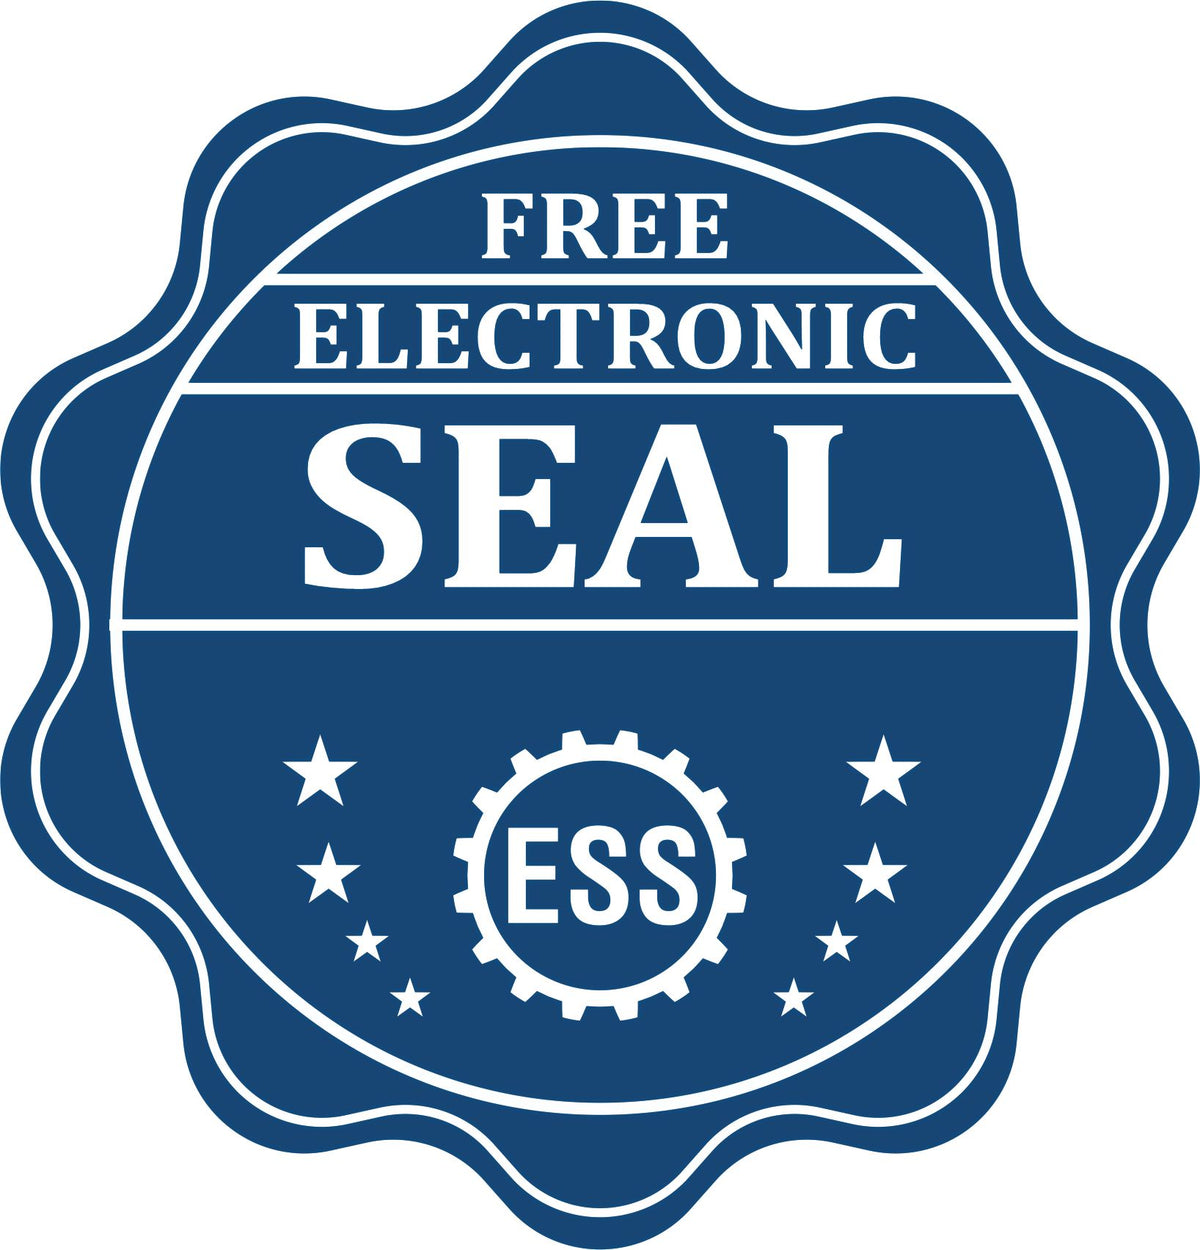 A badge showing a free electronic seal for the Hybrid Florida Architect Seal with stars and the ESS gear on the emblem.